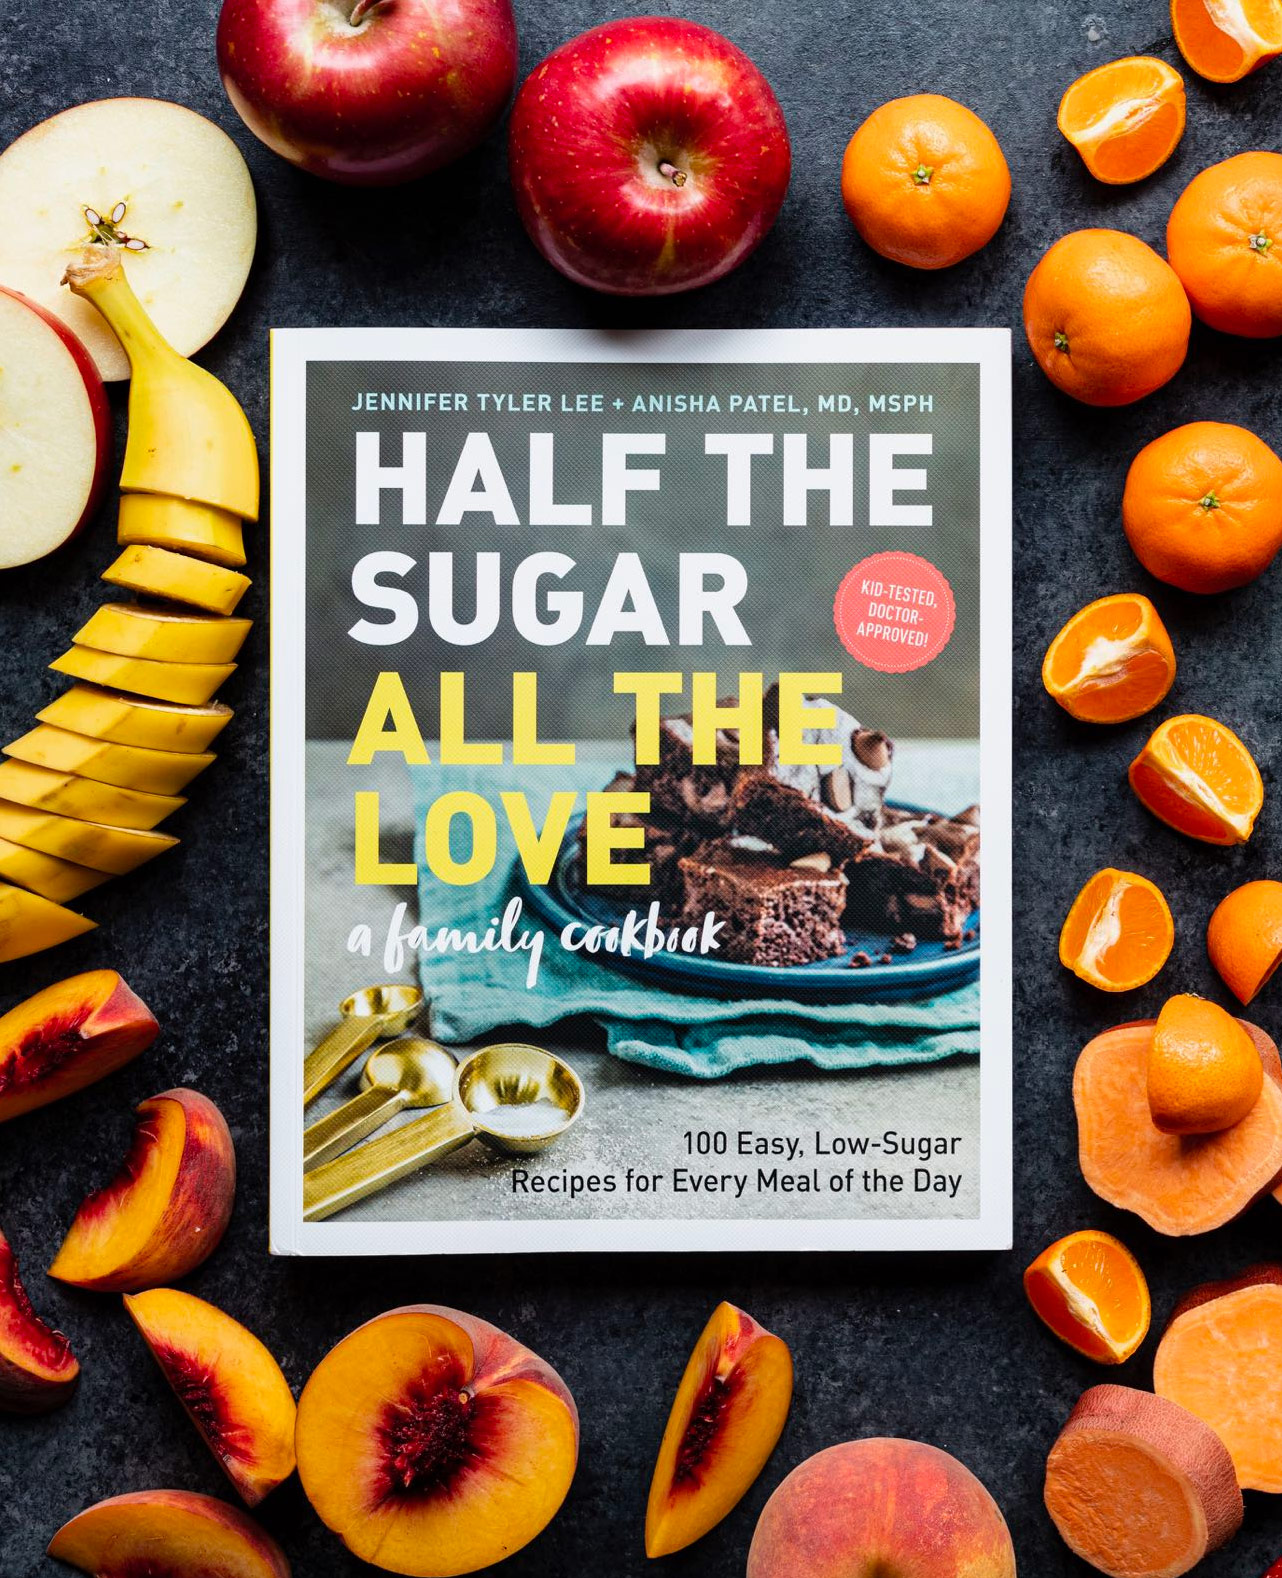 Half the Sugar, All the Love by Jennifer Tyler Lee